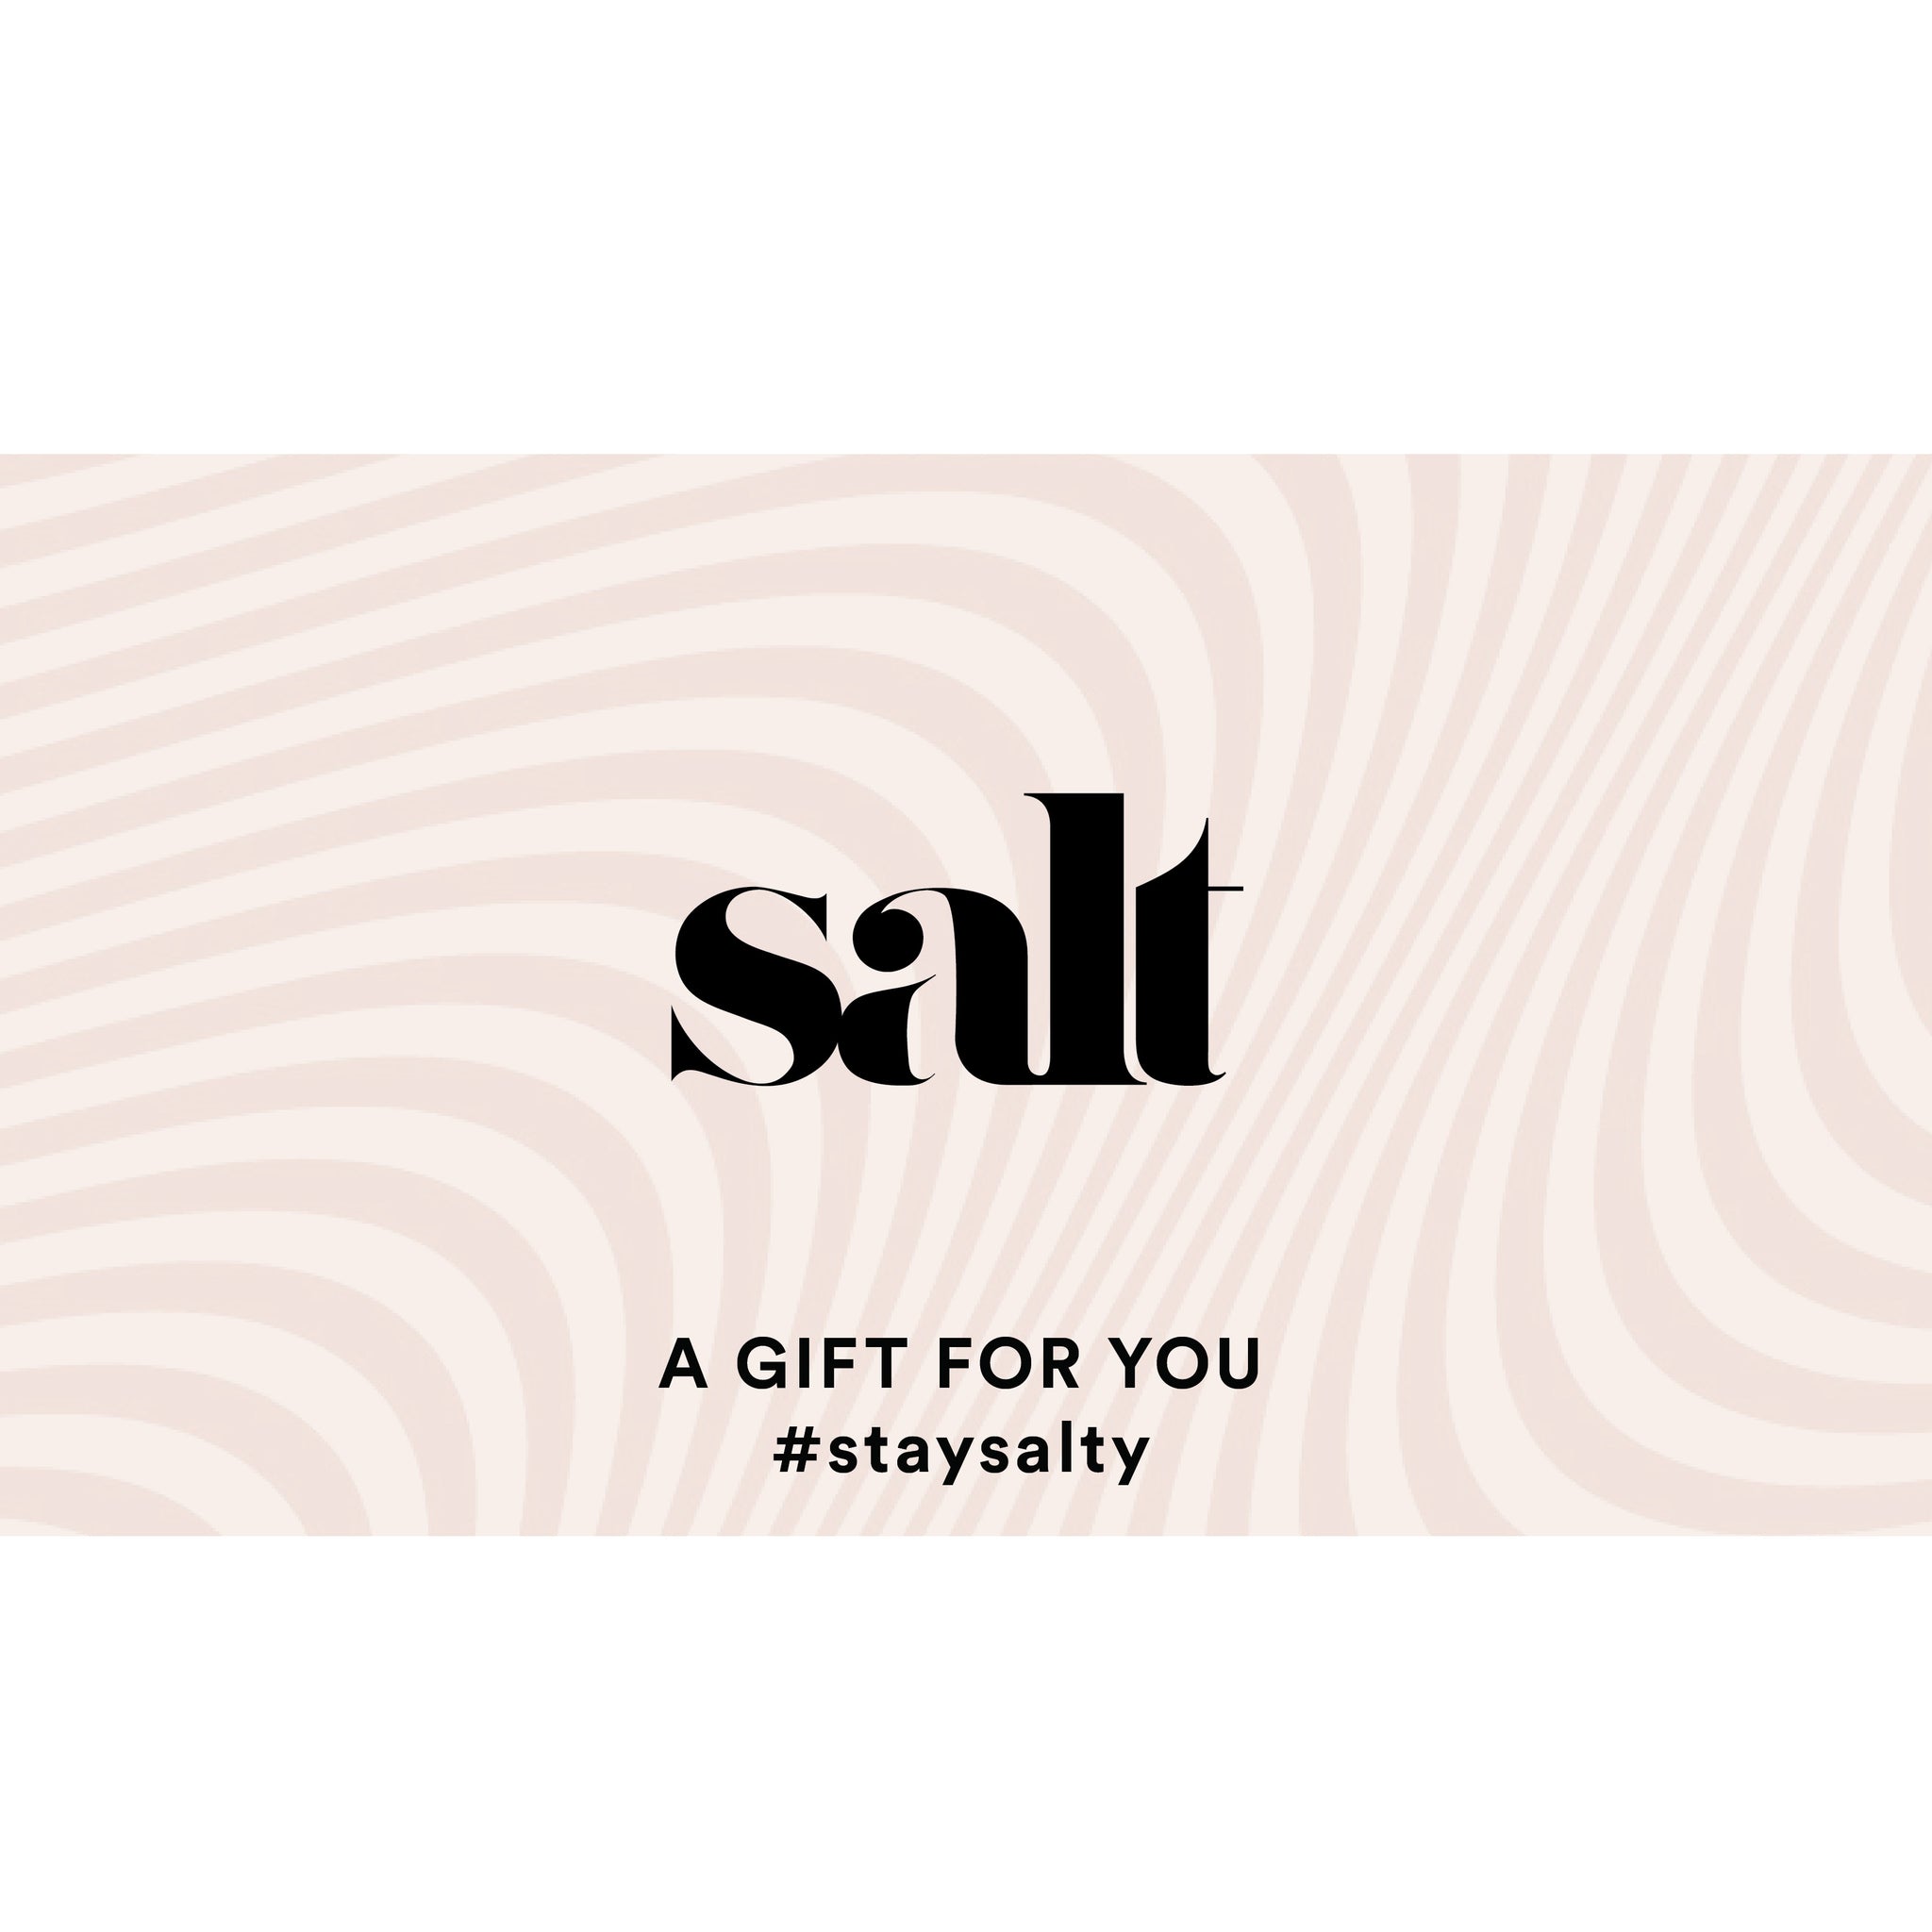 SALT gift cards make great gifts for everyone on your list